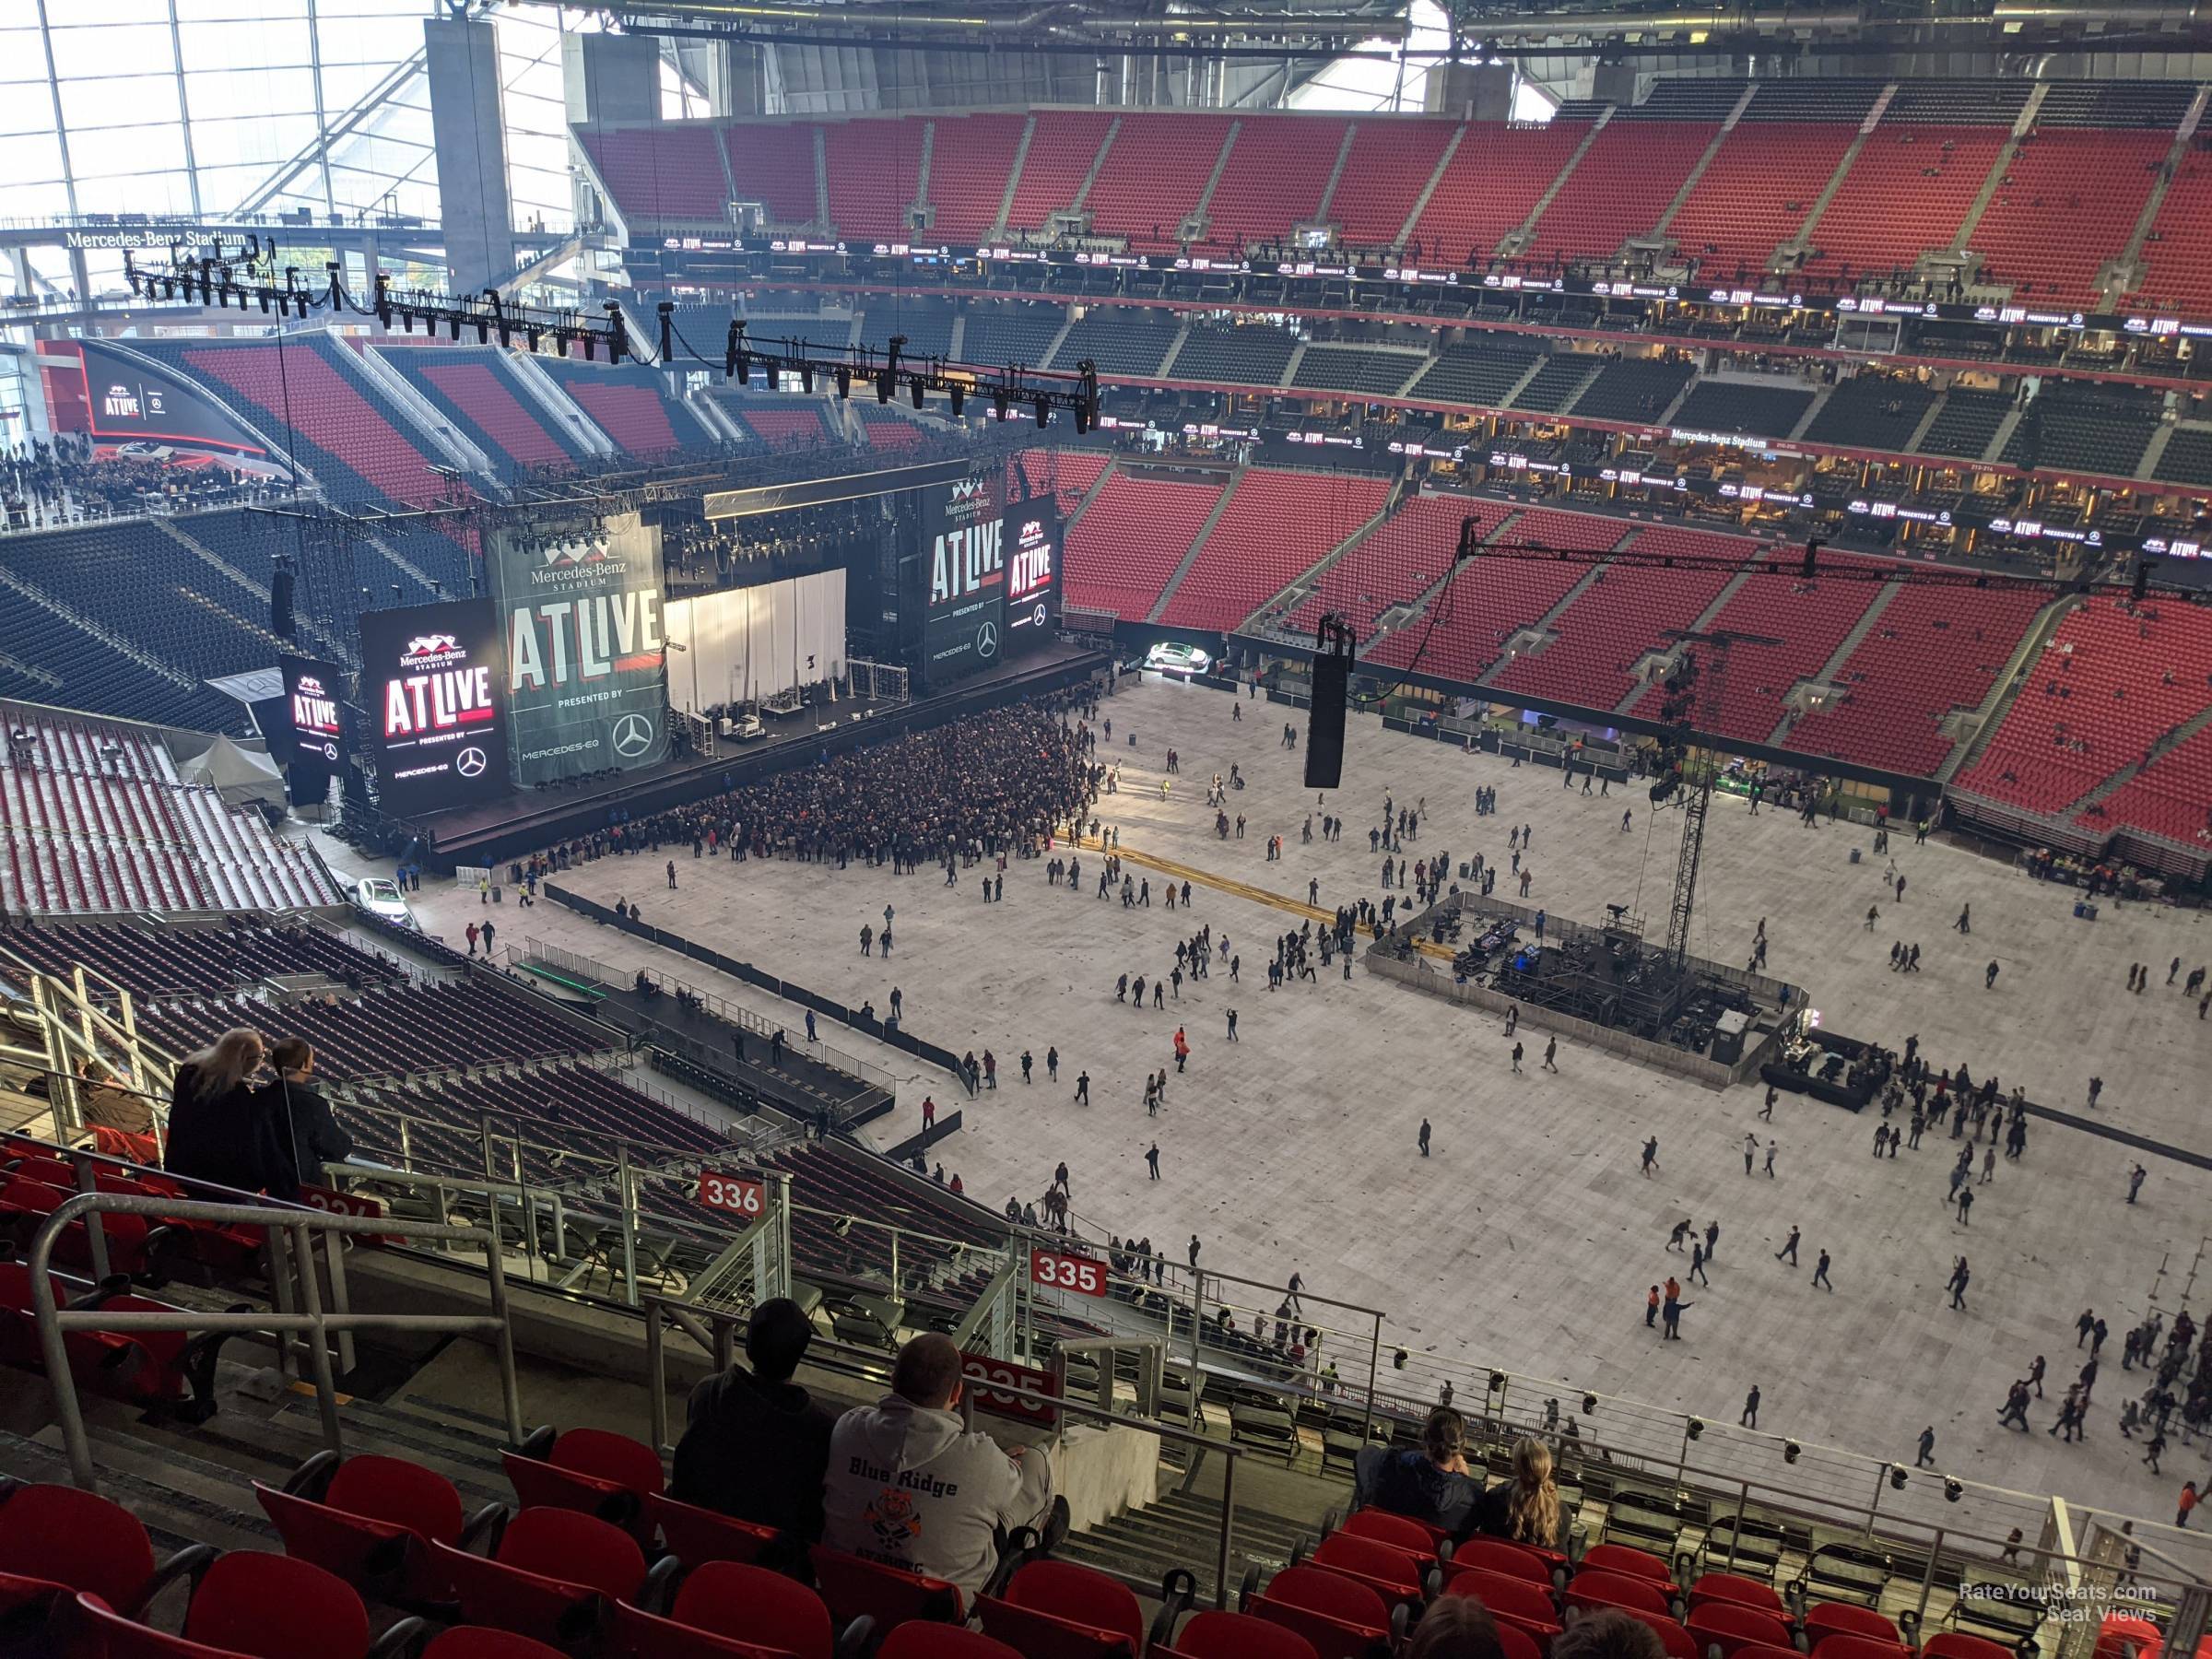 section 335, row 13 seat view  for concert - mercedes-benz stadium